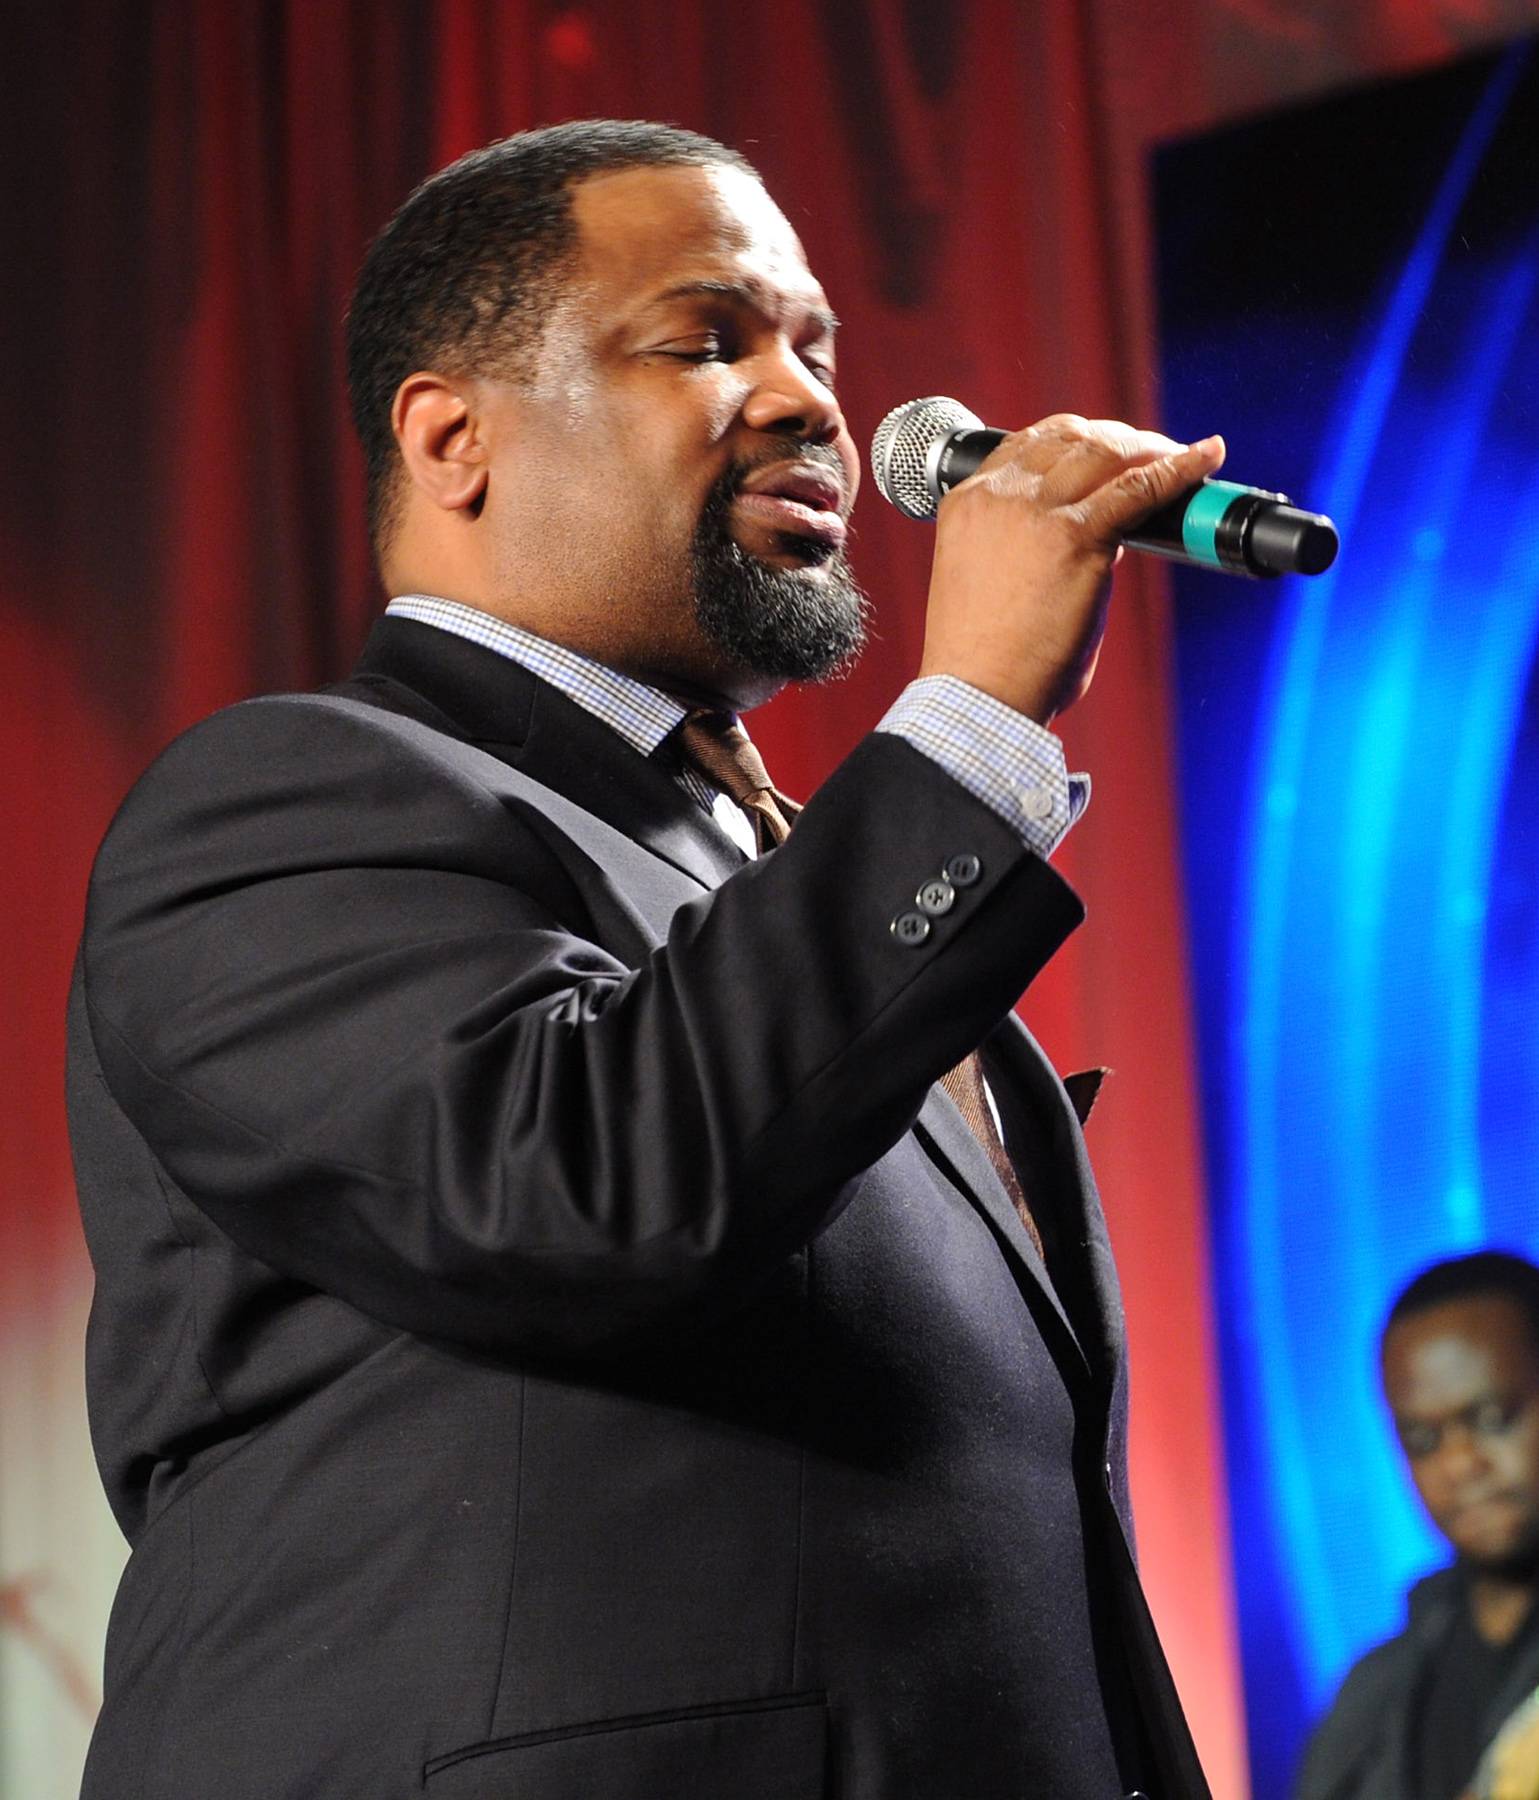 Hezekiah Walker's R&amp;B Contemporaries - Hezekiah Walker is no stranger to the R&amp;B world and has worked with quite a few notable R&amp;B vocalists in his day, even though his love, passion and career is rooted in gospel. Click on to see Hezekiah's R&amp;B contemporaries and catch him on this year's Celebration of Gospel.  (Photo: Rick Diamond/Getty Images for BMI)